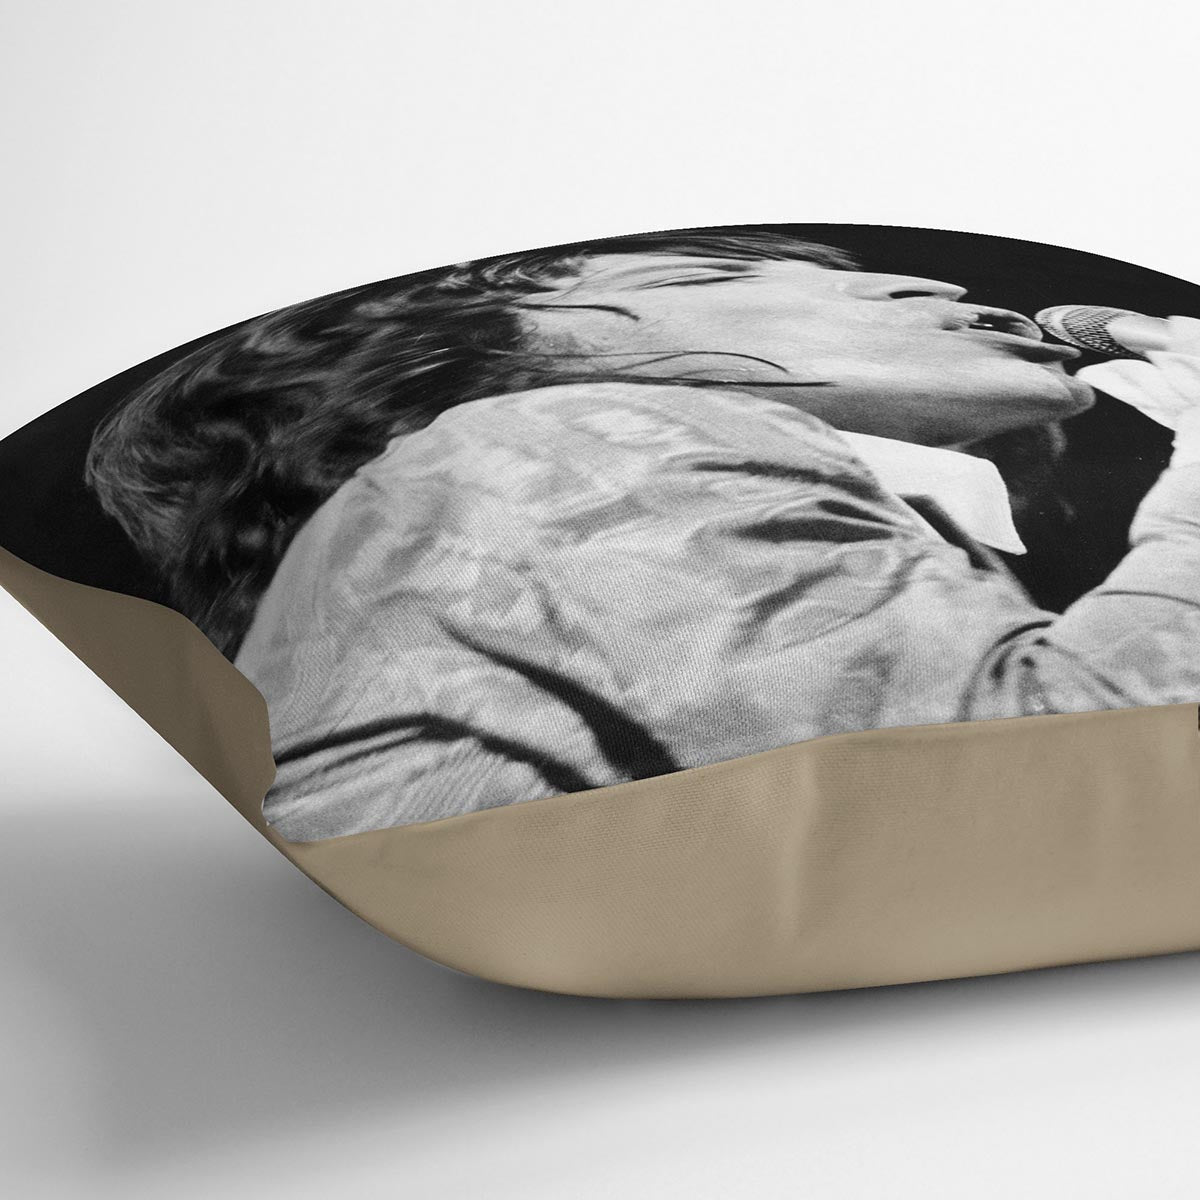 Mick Jagger belts it out Cushion